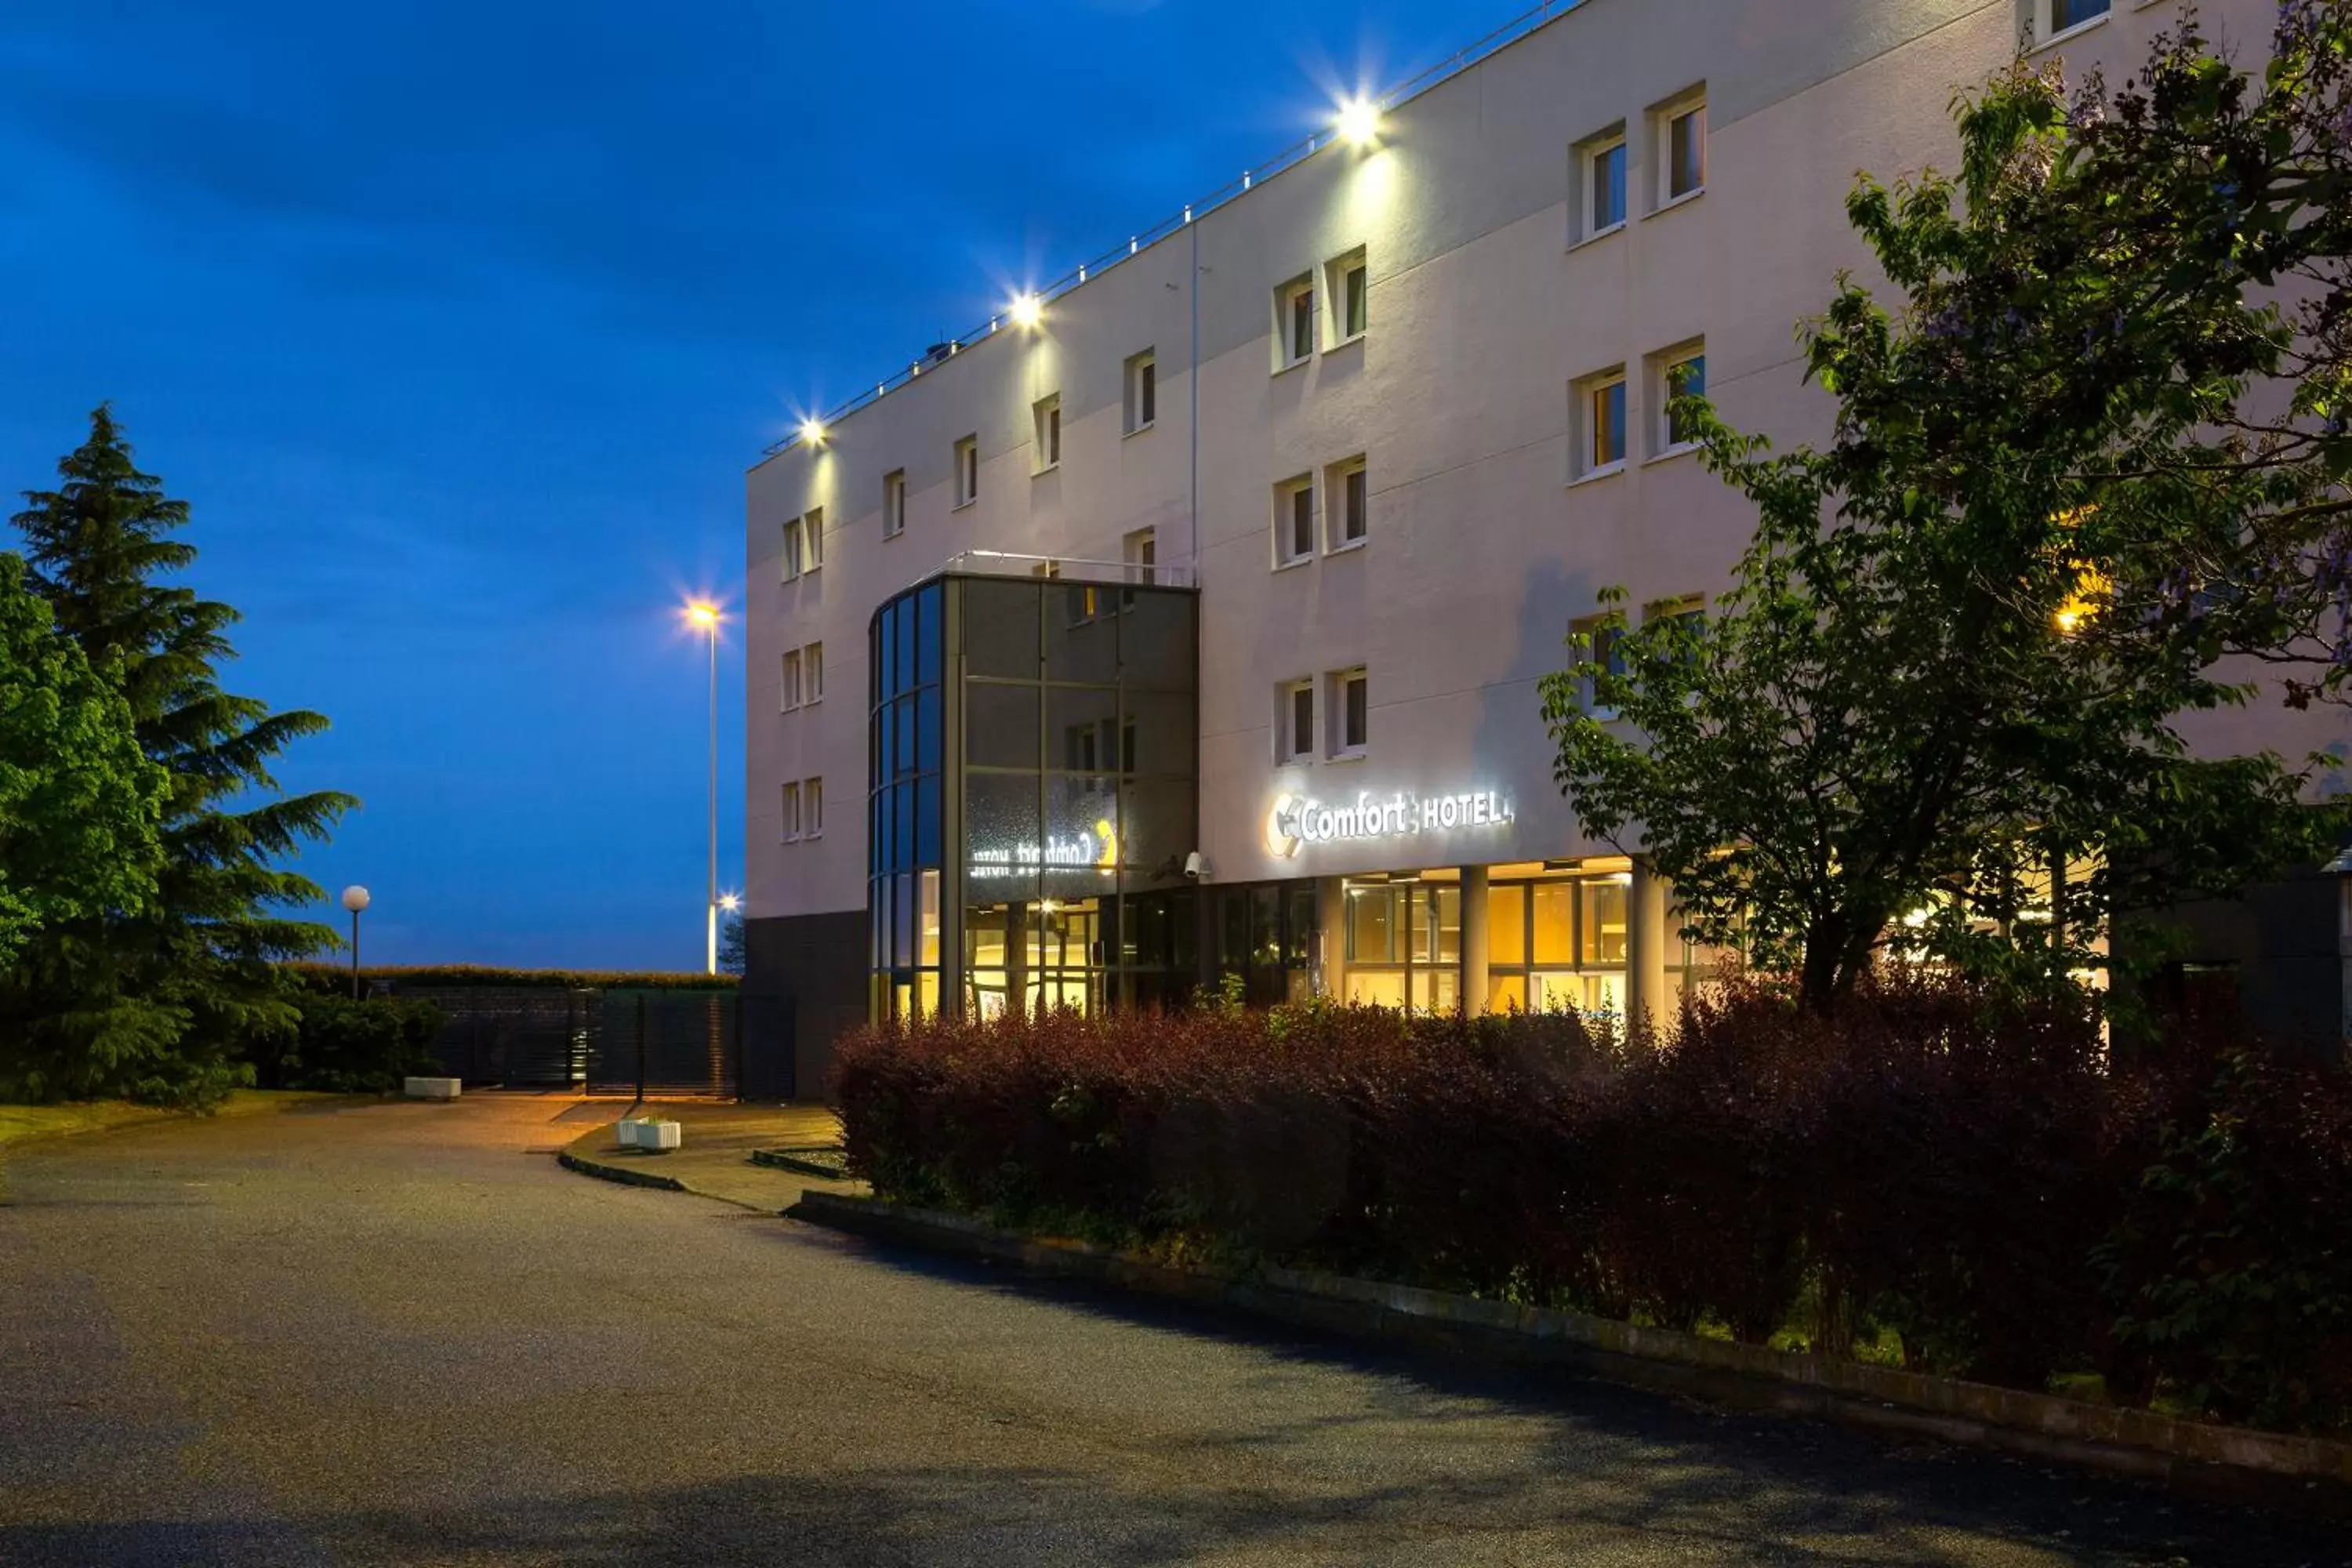 Property Building in Comfort Hotel Aeroport Lyon St Exupery